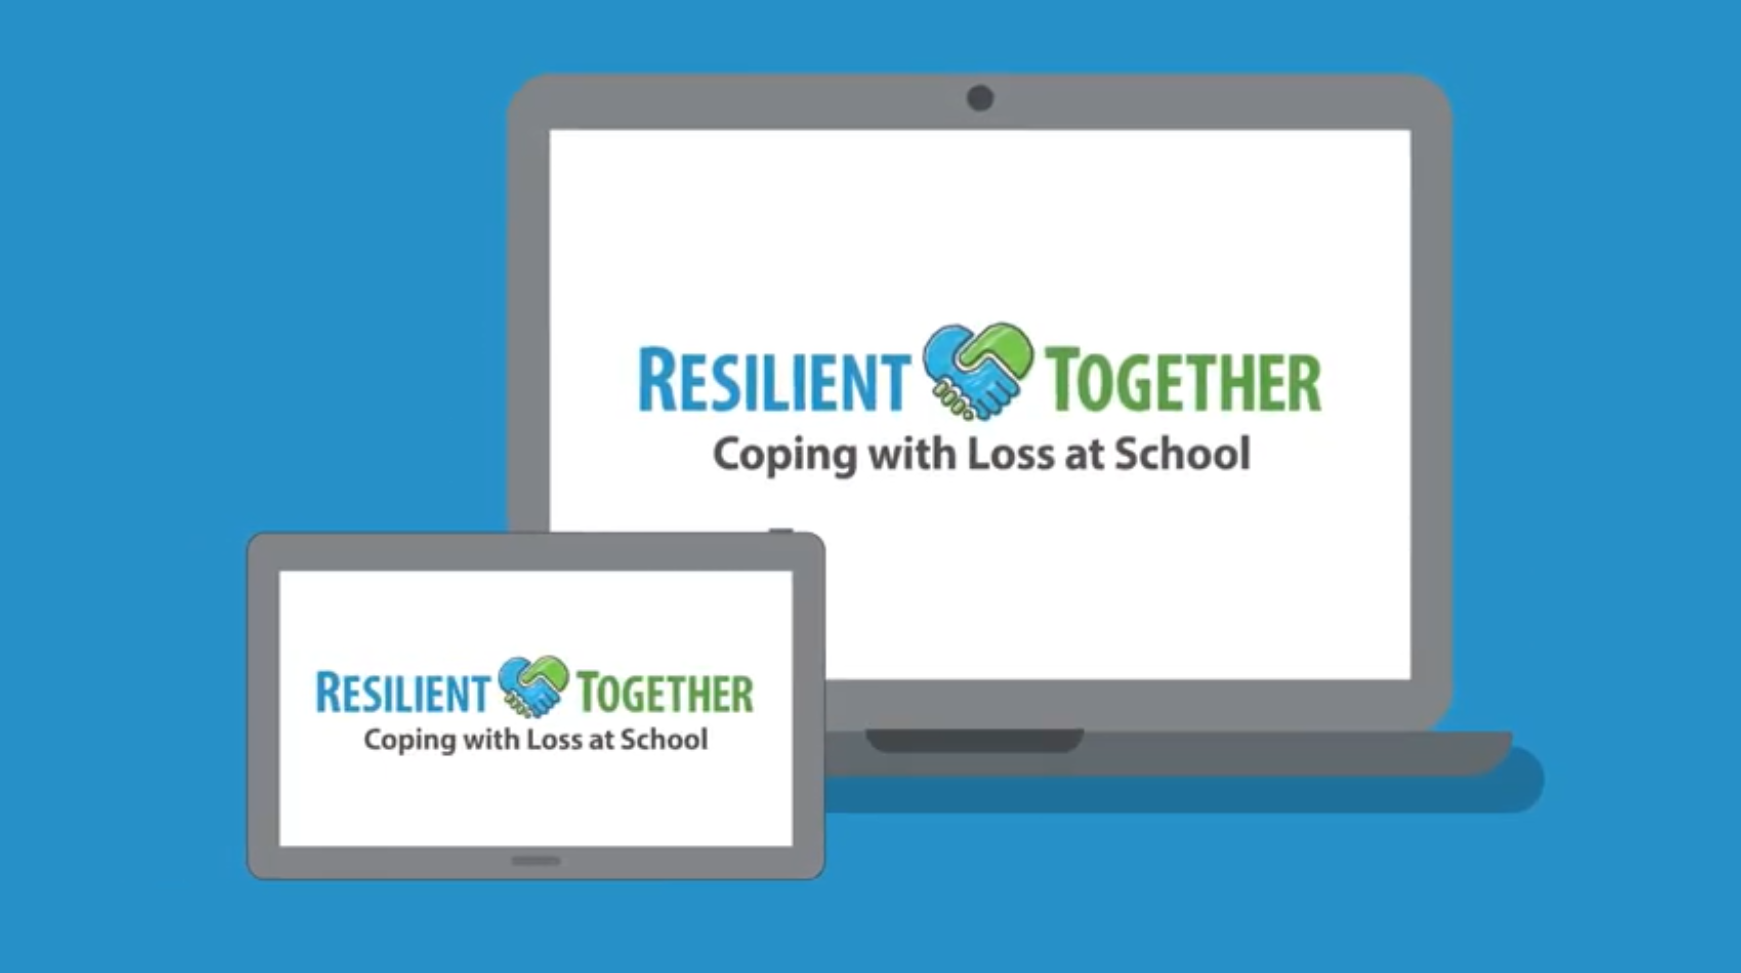 Kognito Trailer: Resilient Together: Coping with Loss at School